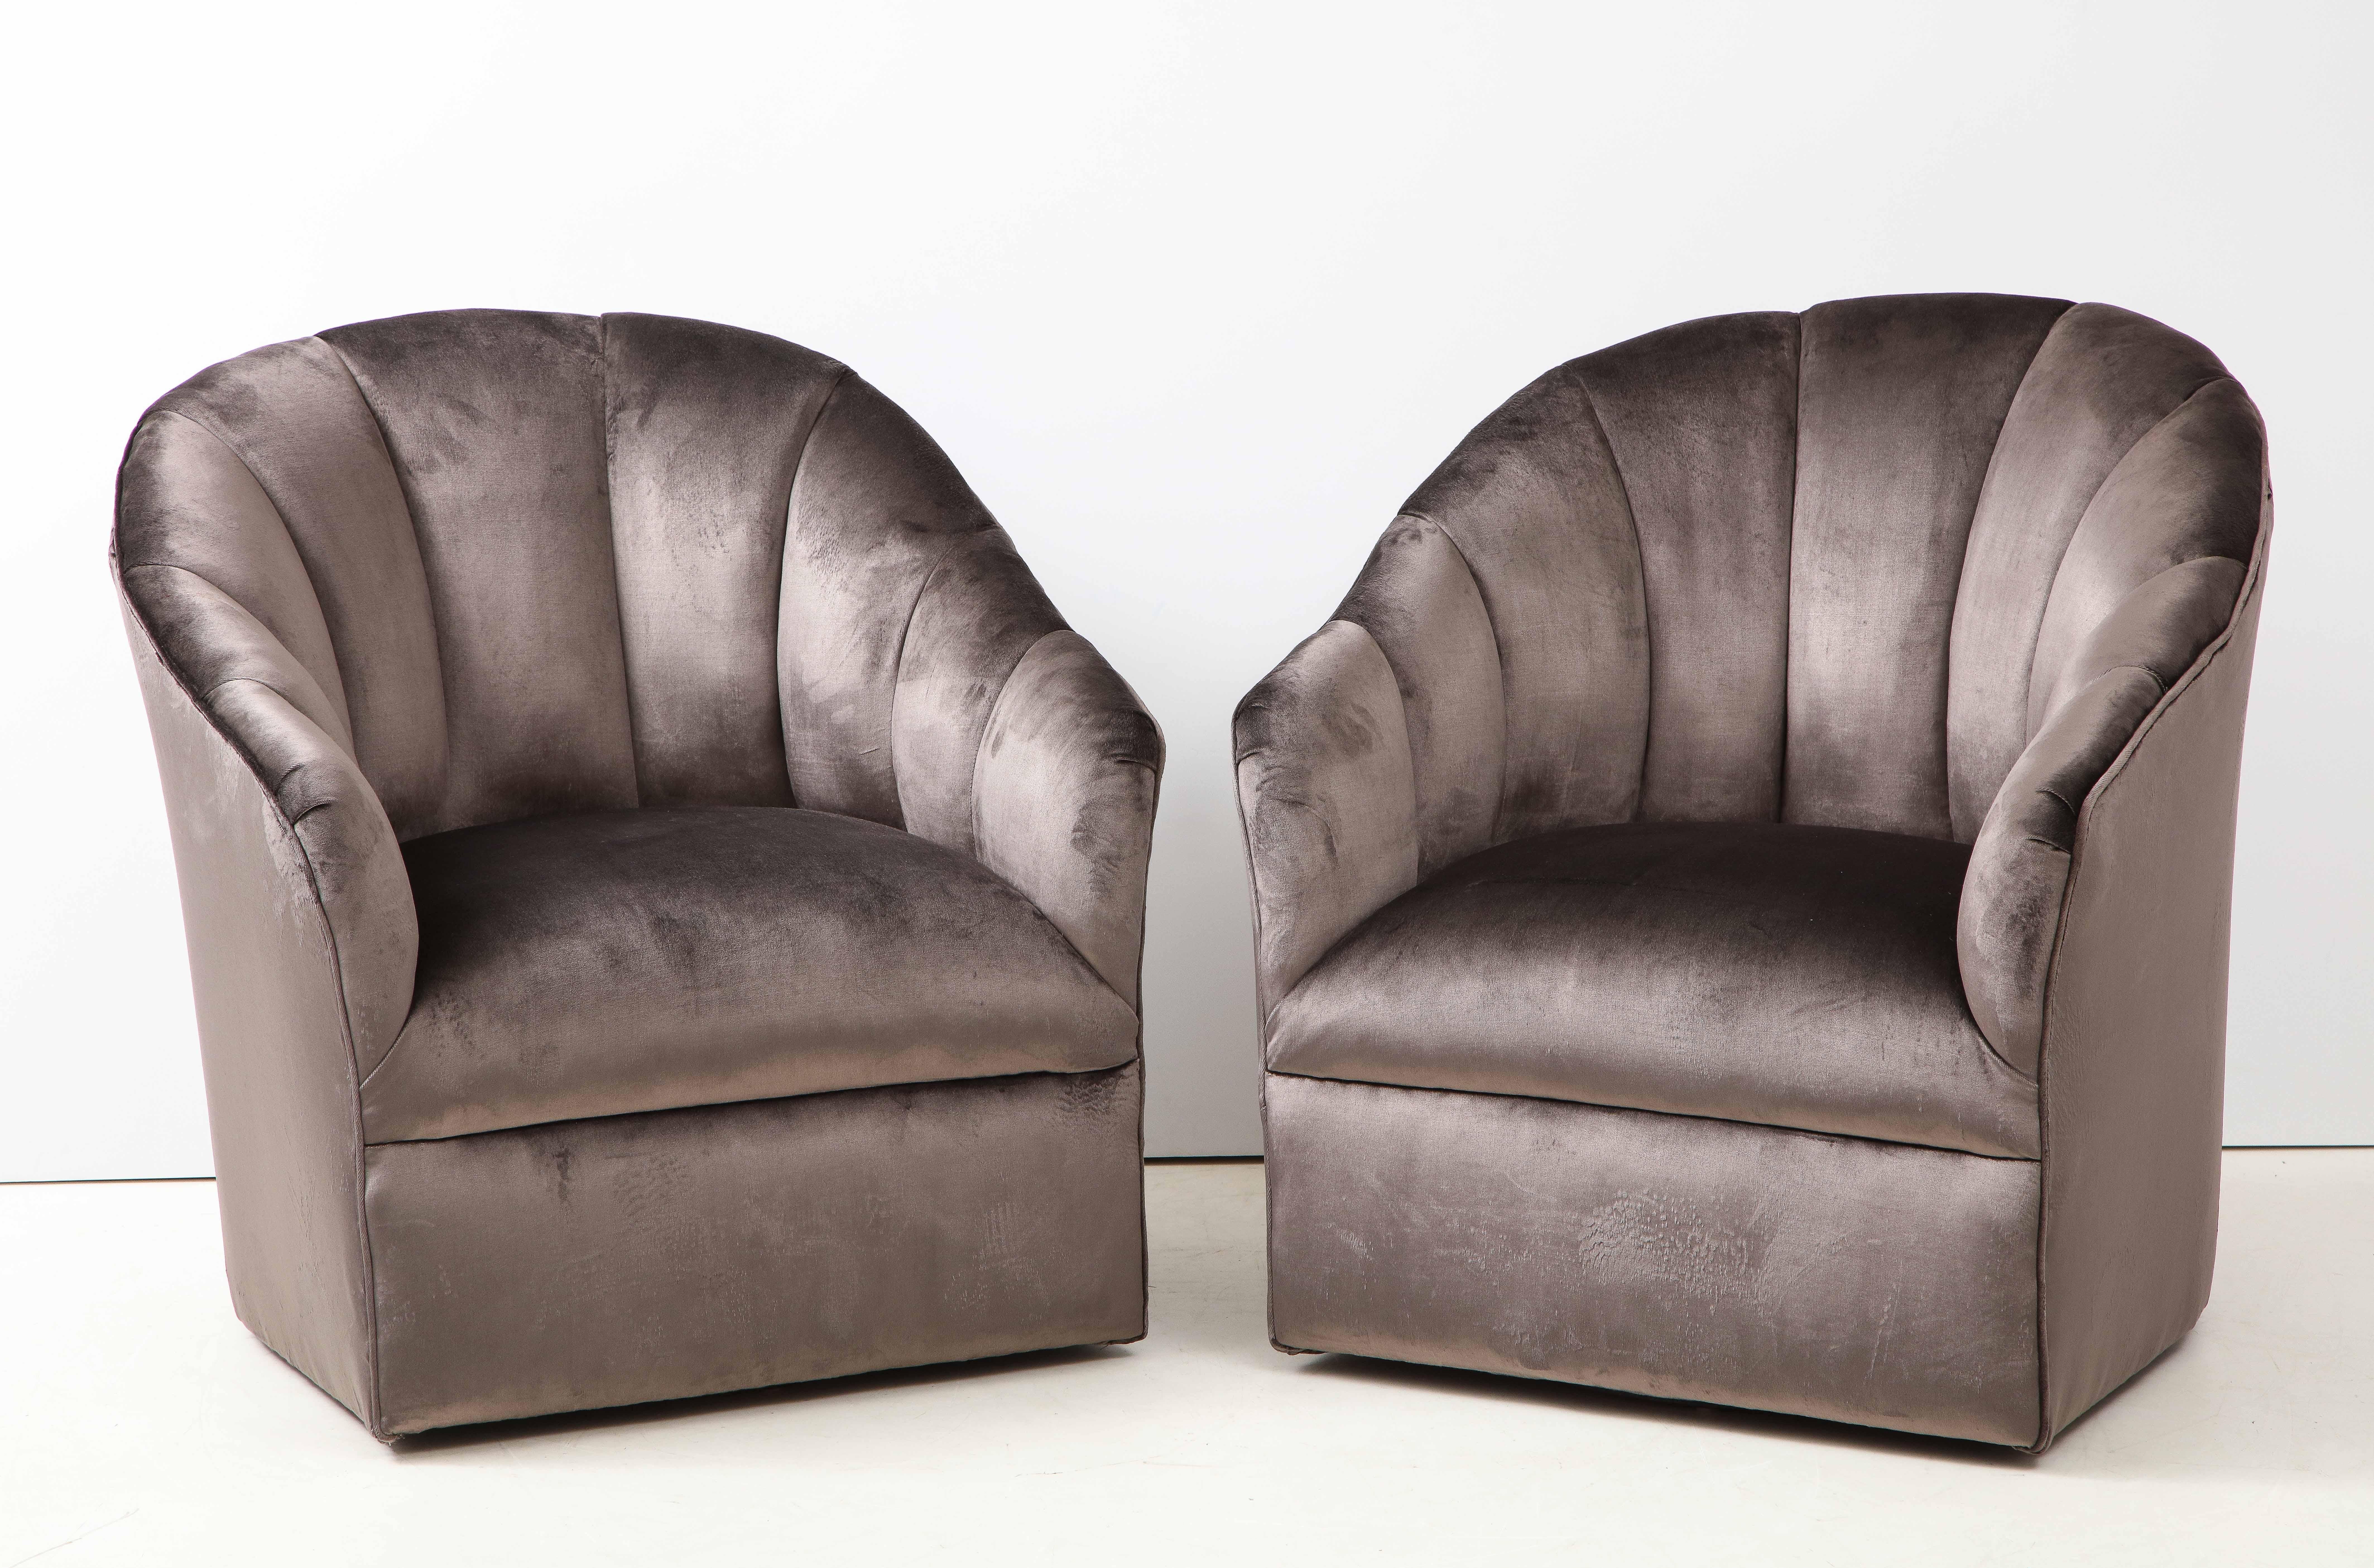 Stunning pair of 1980s swivel lounge chairs designed by Vladimir Kagan for directional, newly reupholstered in velvet.